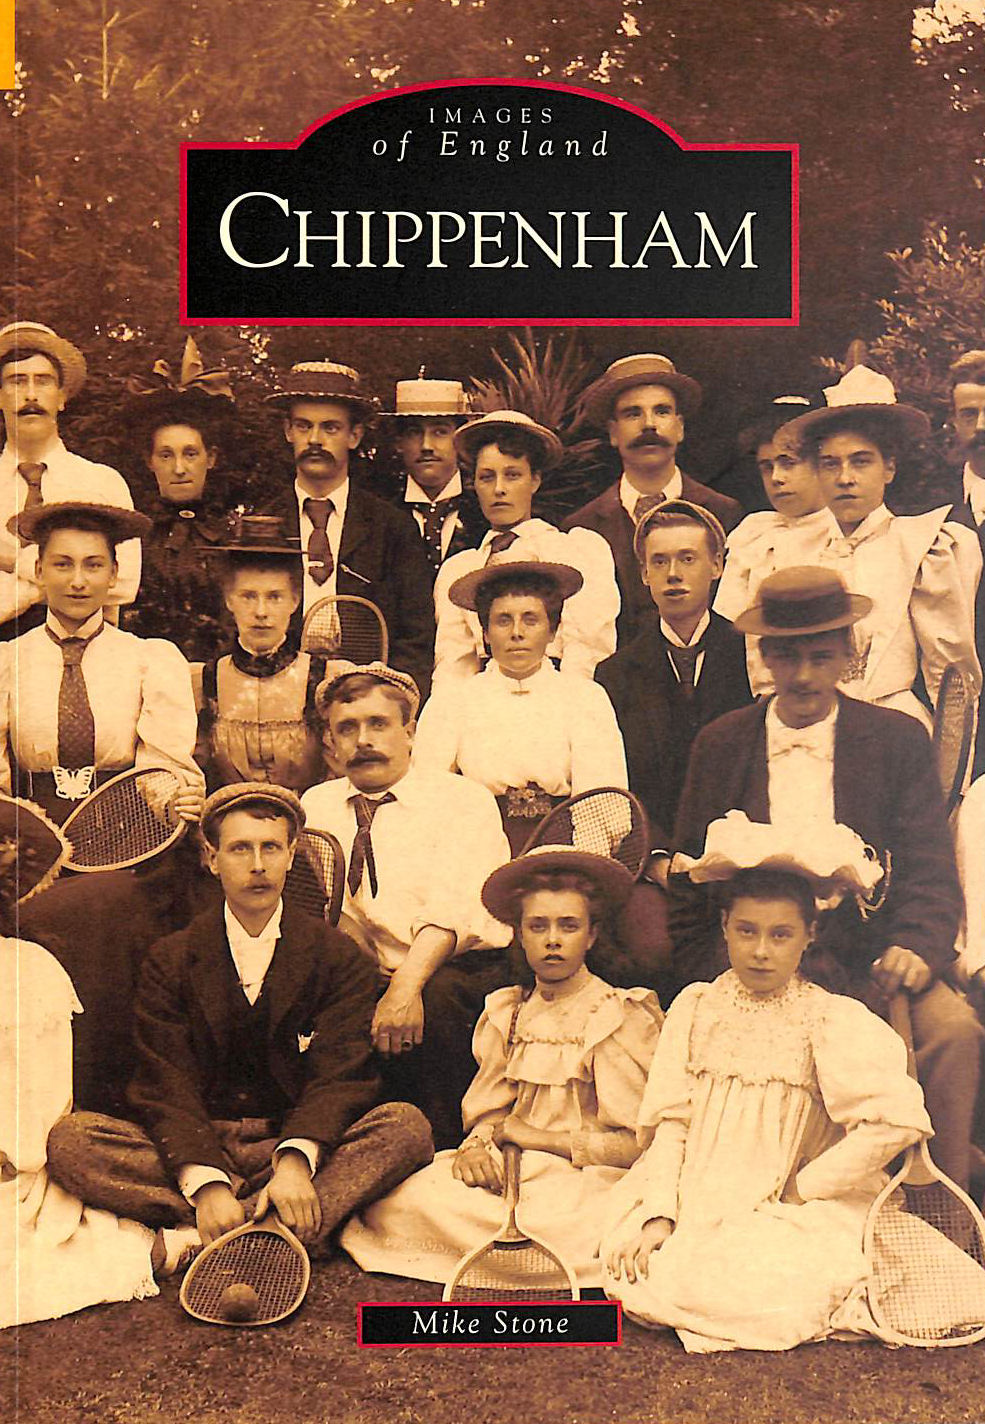 MIKE STONE - Chippenham (Archive Photographs: Images of England)